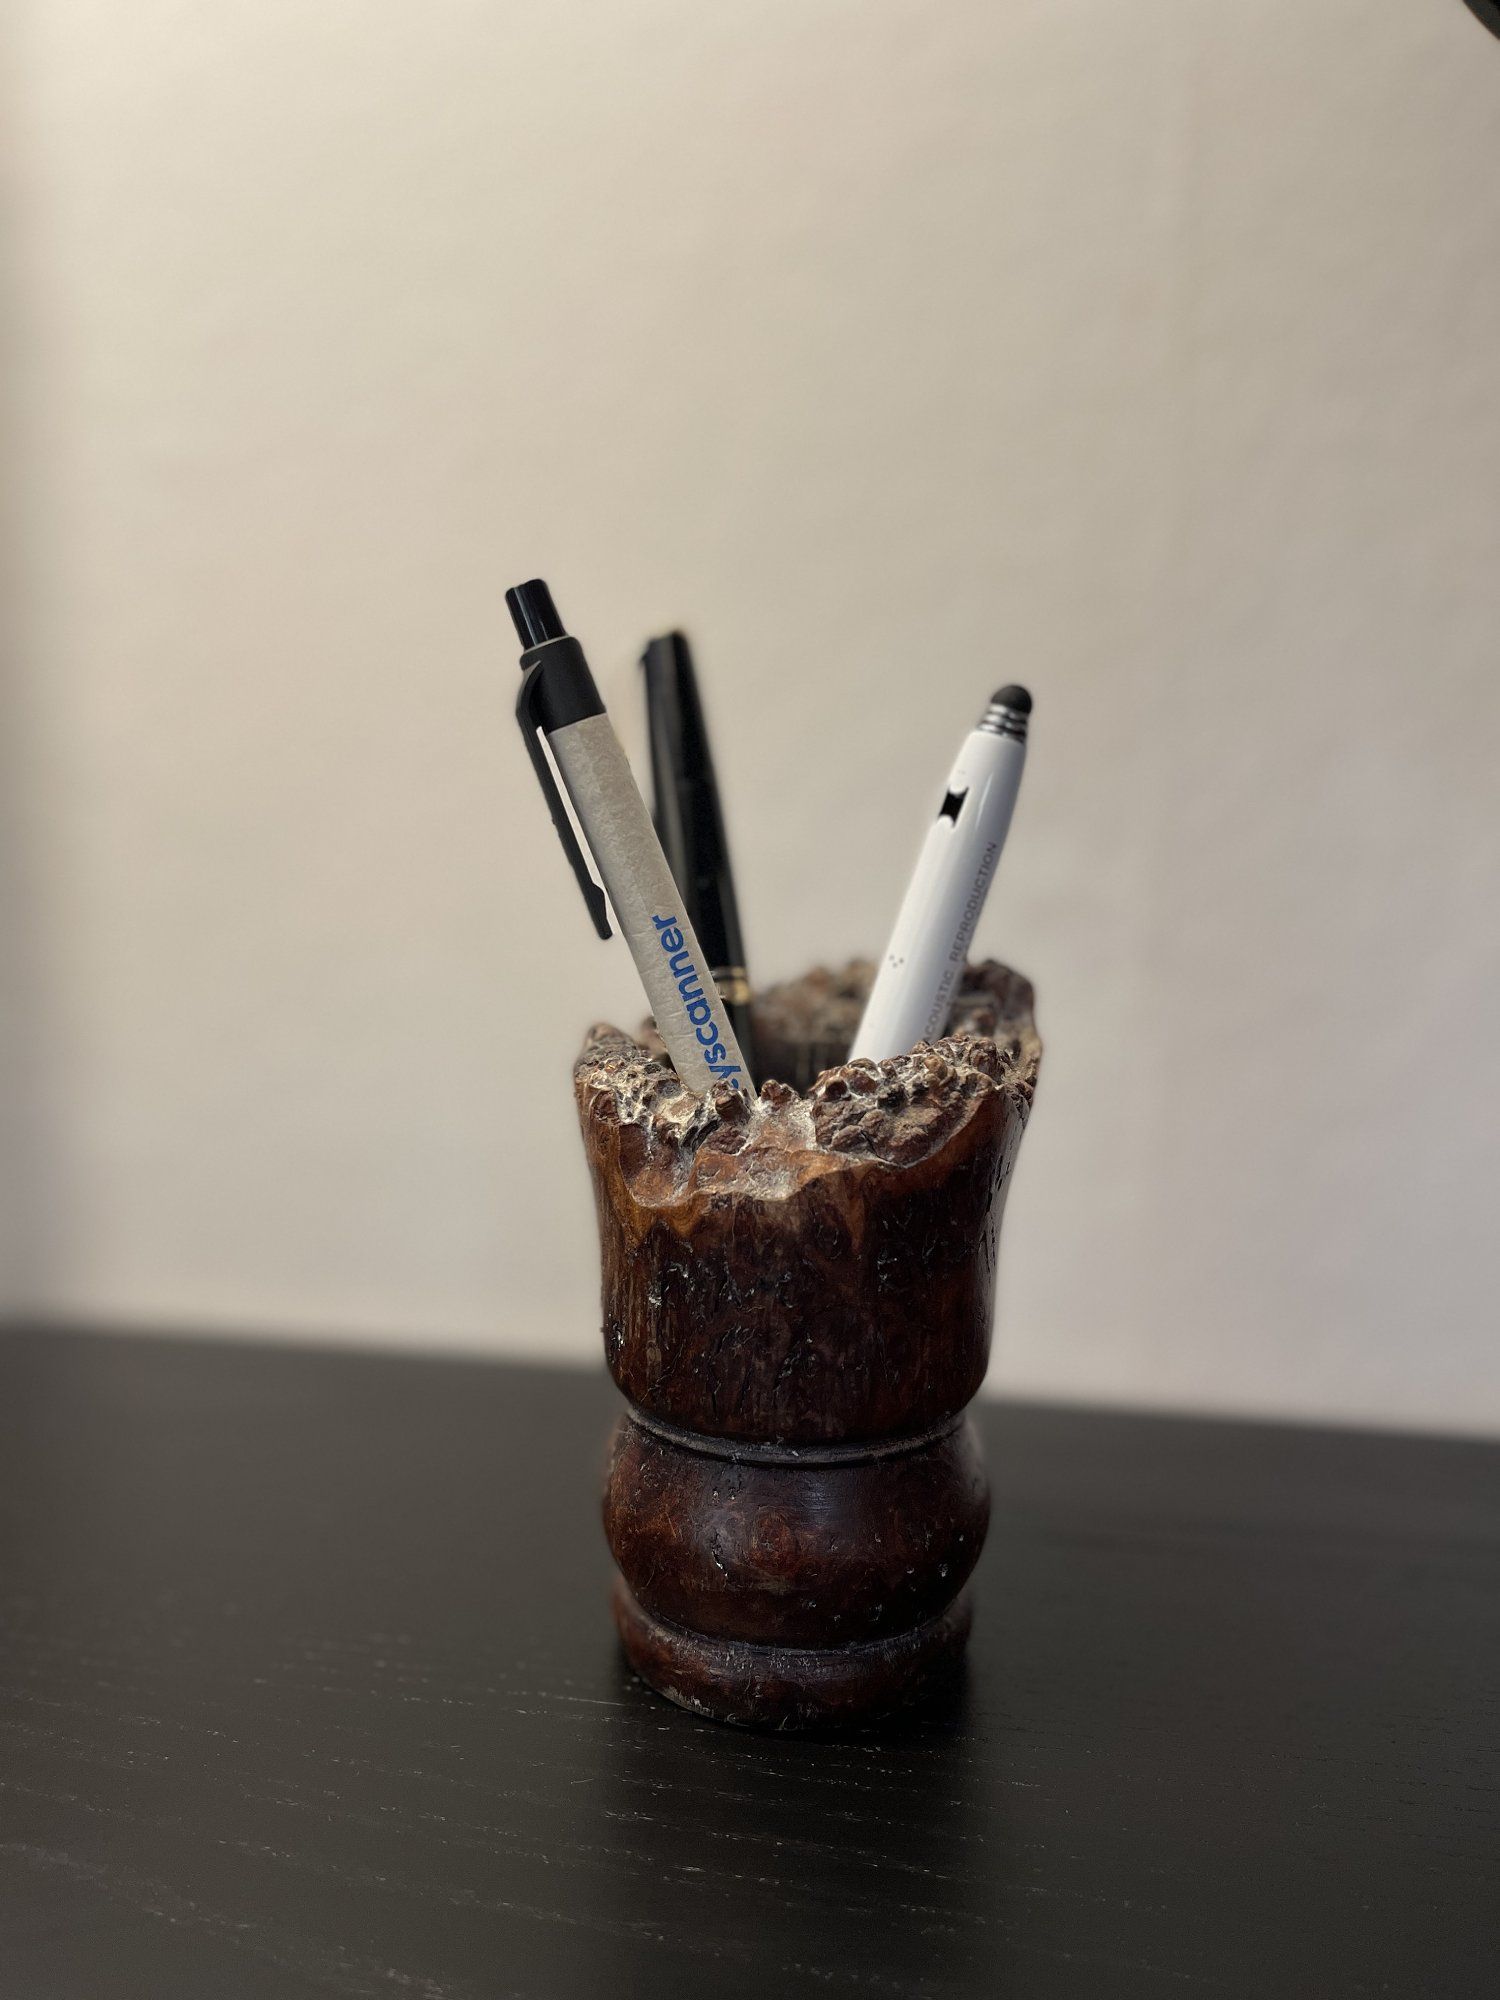 A wooden pen holder with three pens